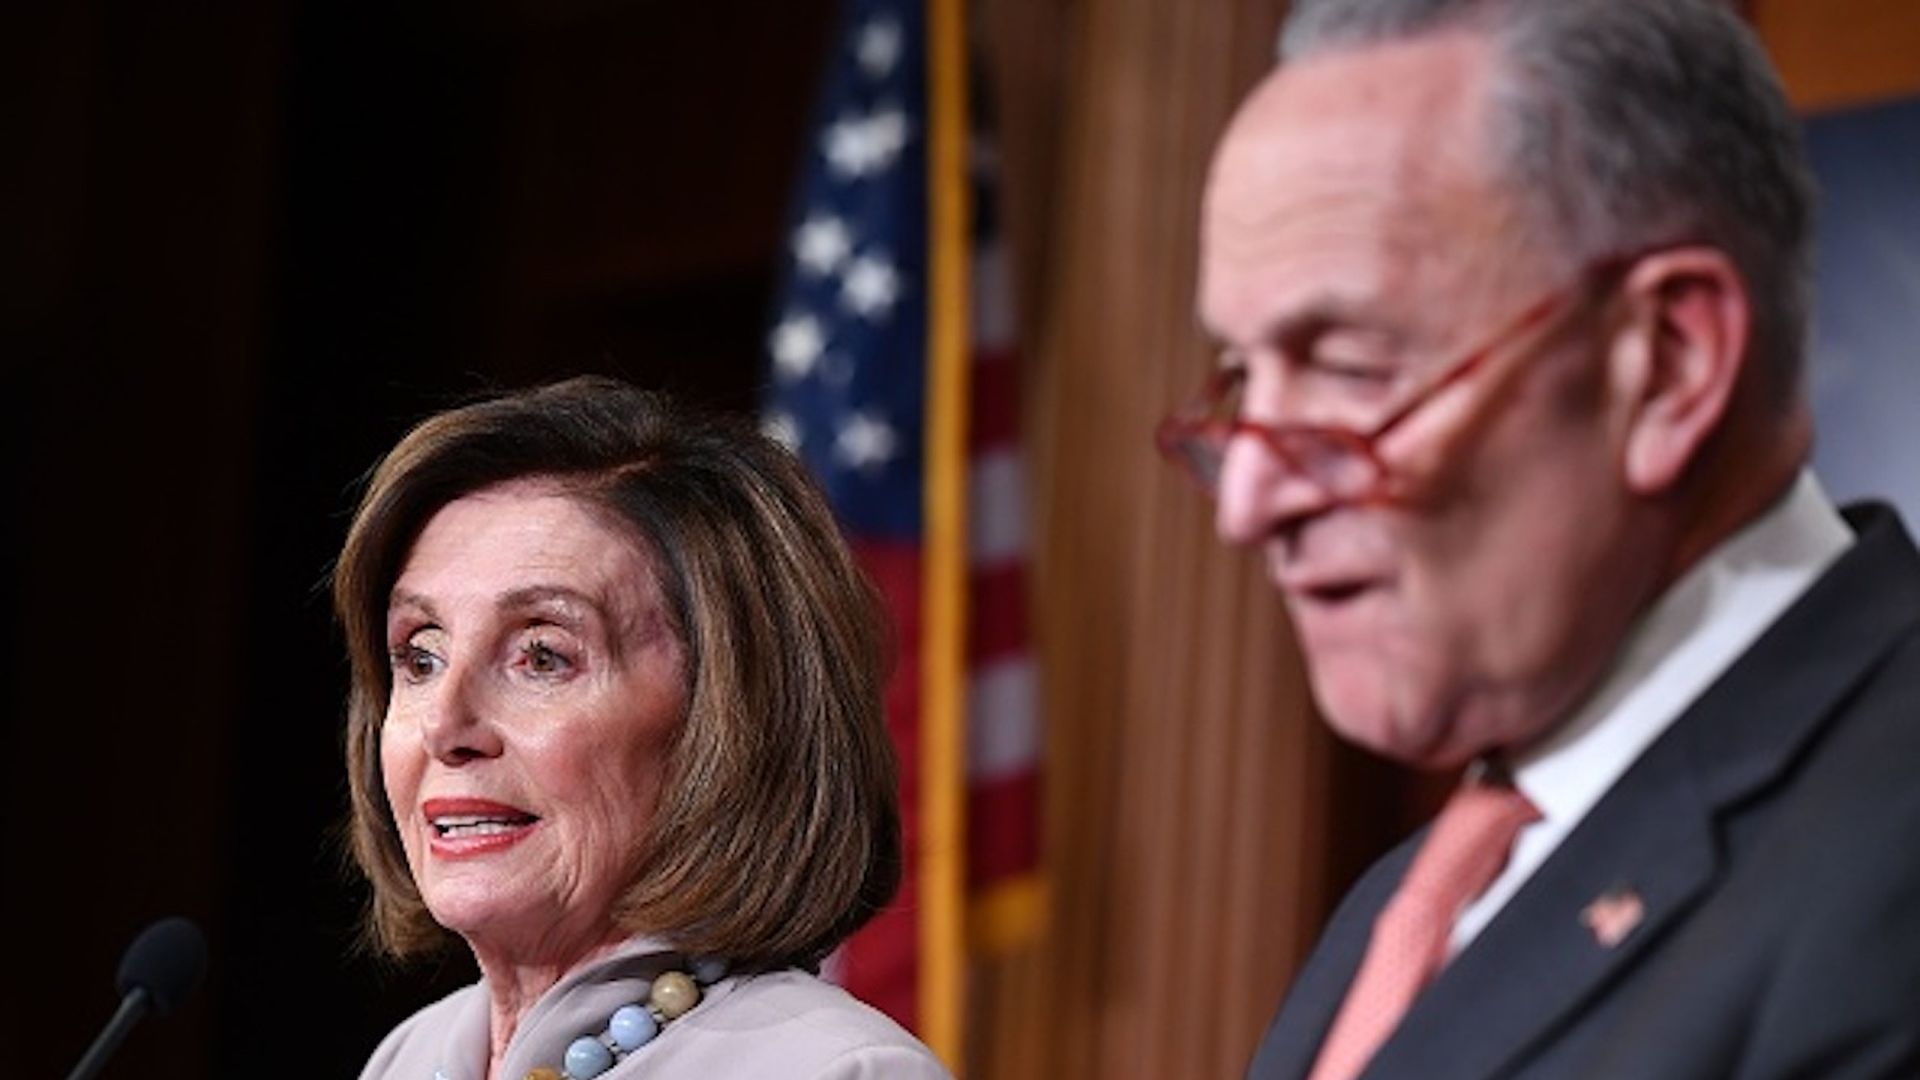 Speaker of the House Nancy Pelosi and Senate Minority Leader Chuck Schumer speaking at a press conference